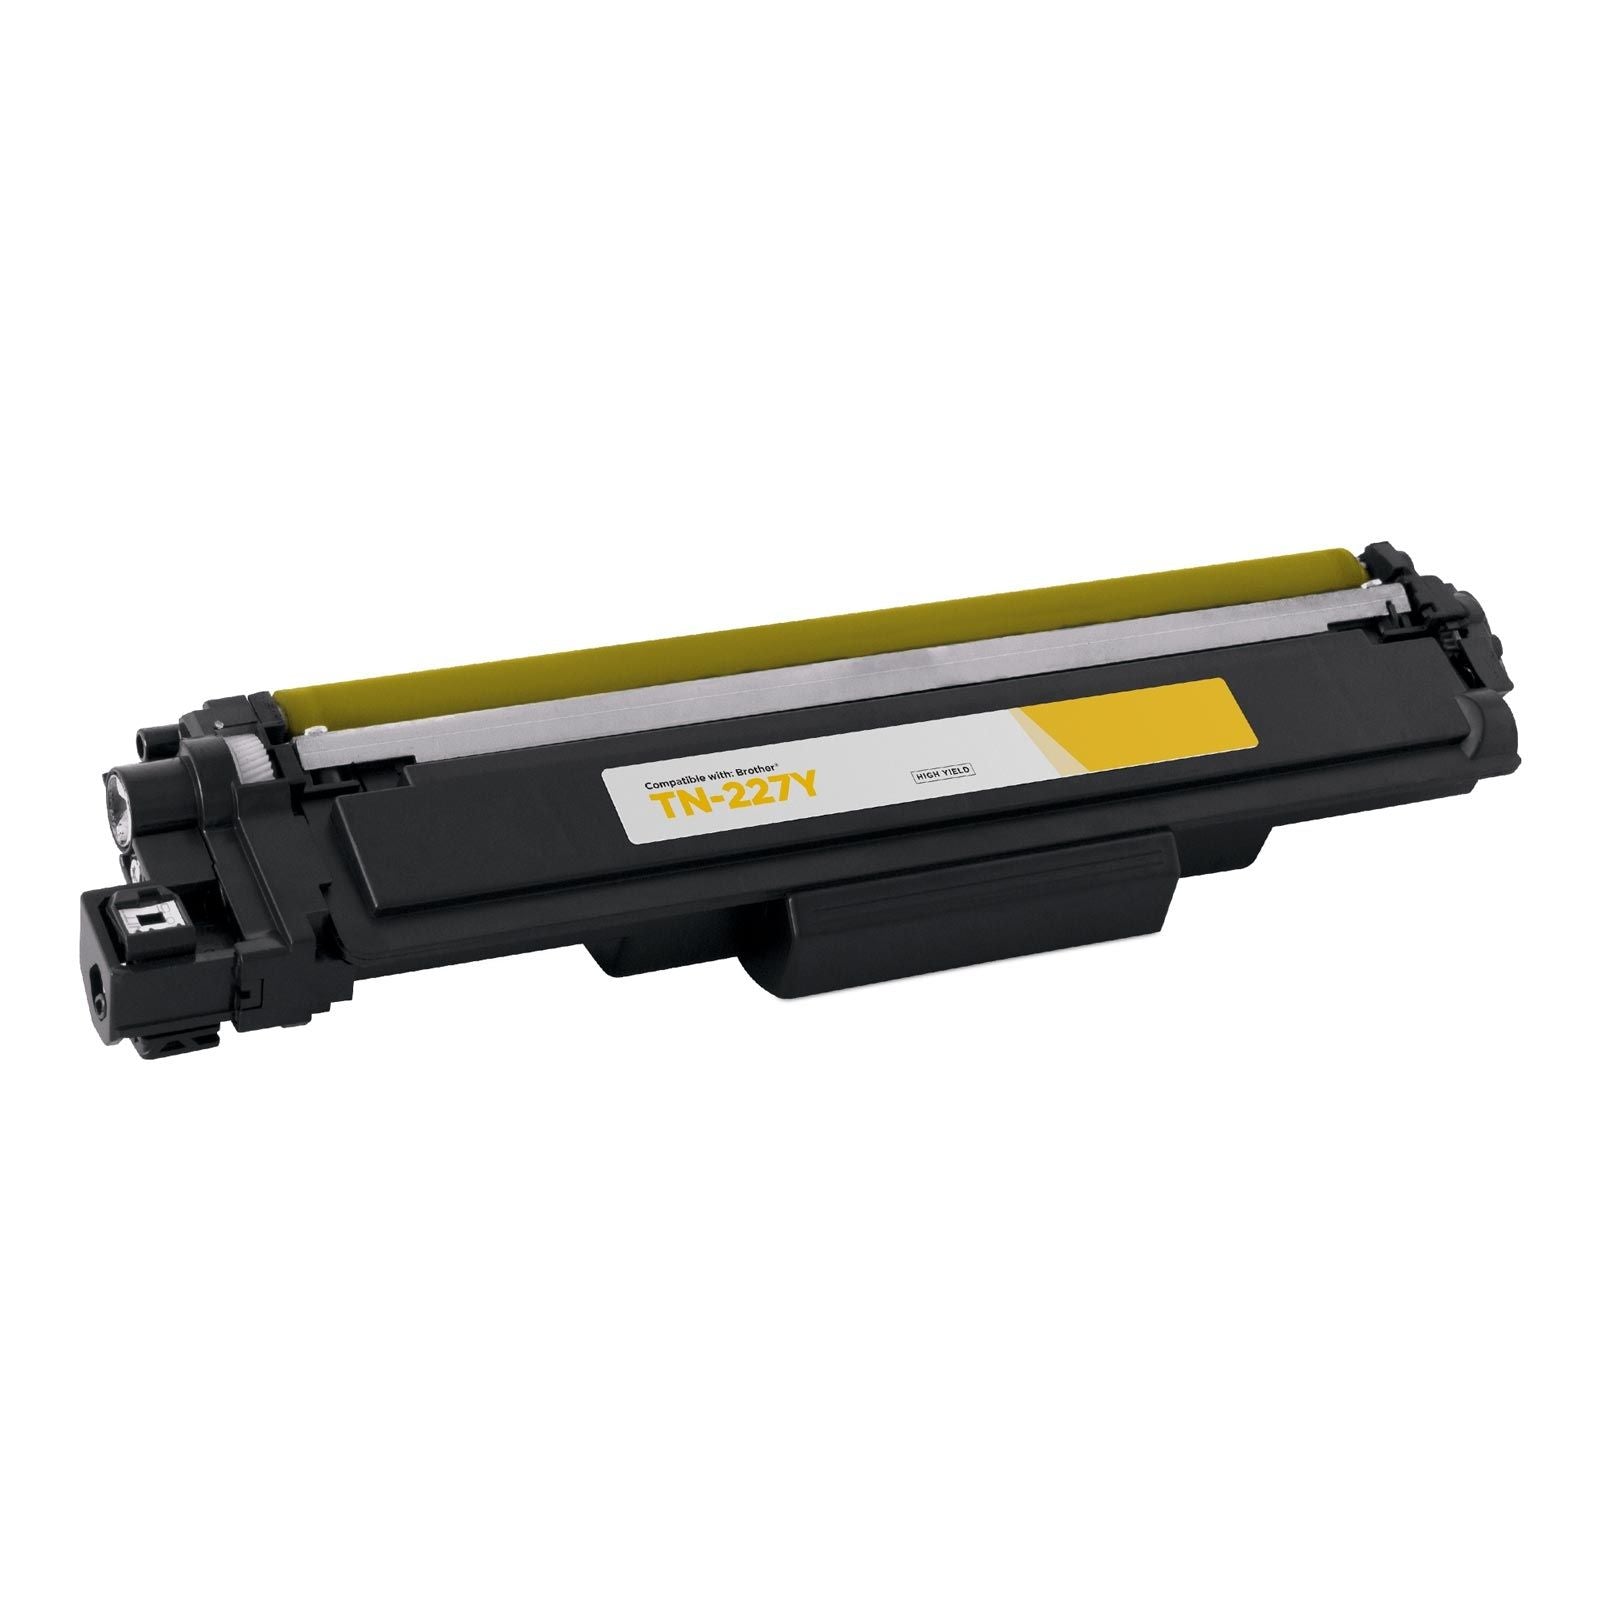 TN227Y with new chip IMPERIAL BRAND TN227 YELLOW TONER 2,300 PAGES